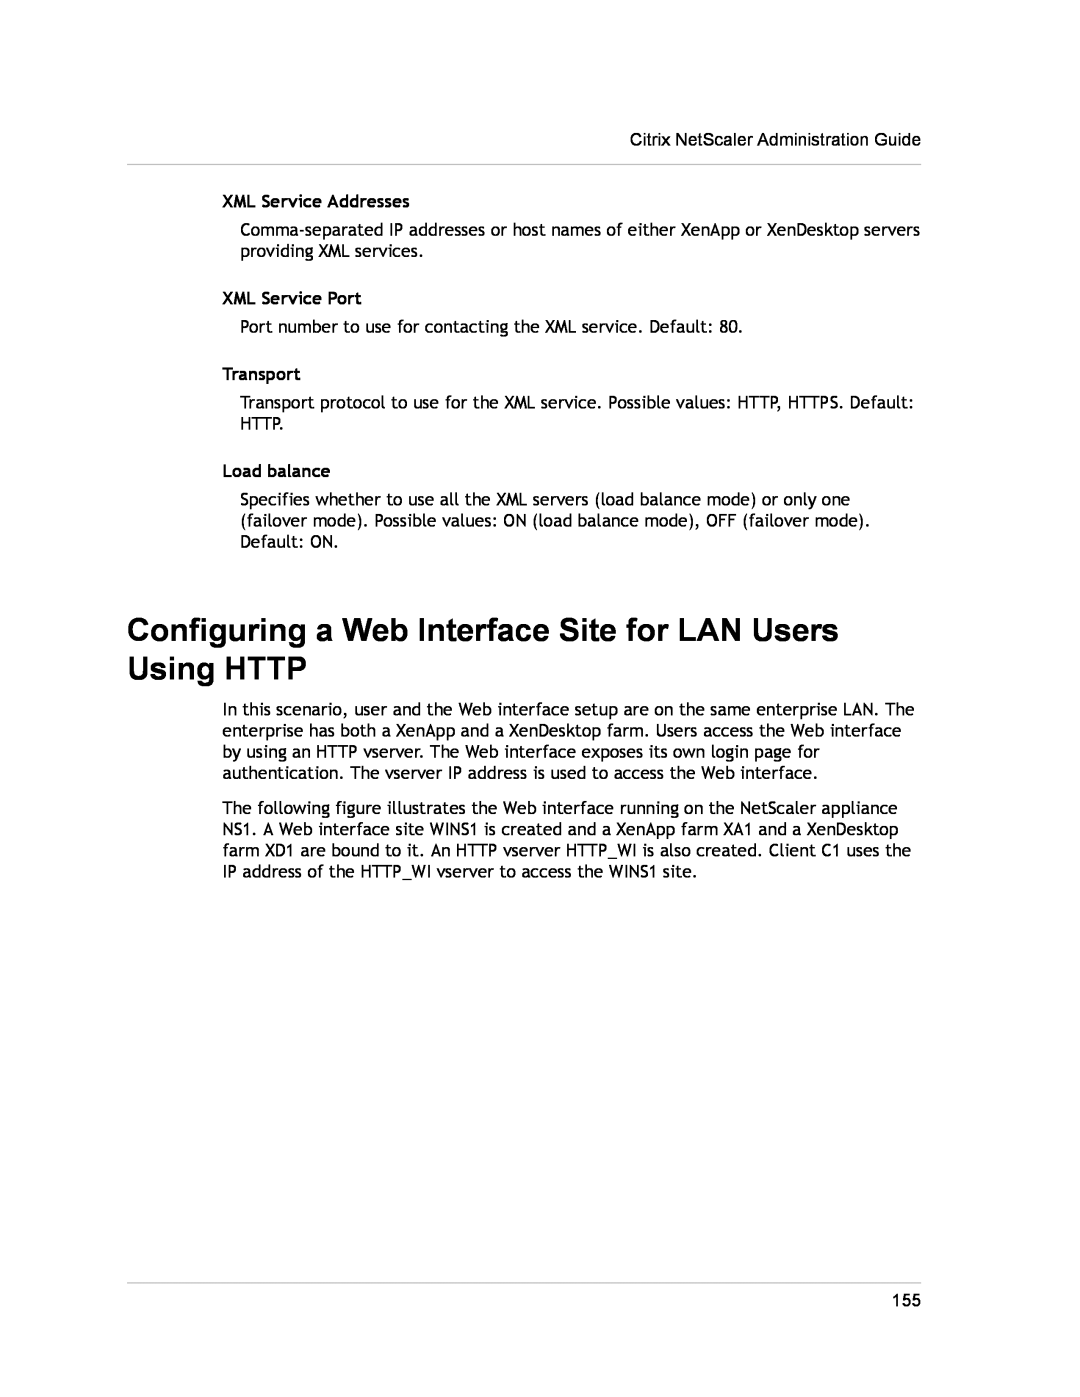 Citrix Systems CITRIX NETSCALER 9.3 manual Configuring a Web Interface Site for LAN Users Using HTTP, XML Service Addresses 